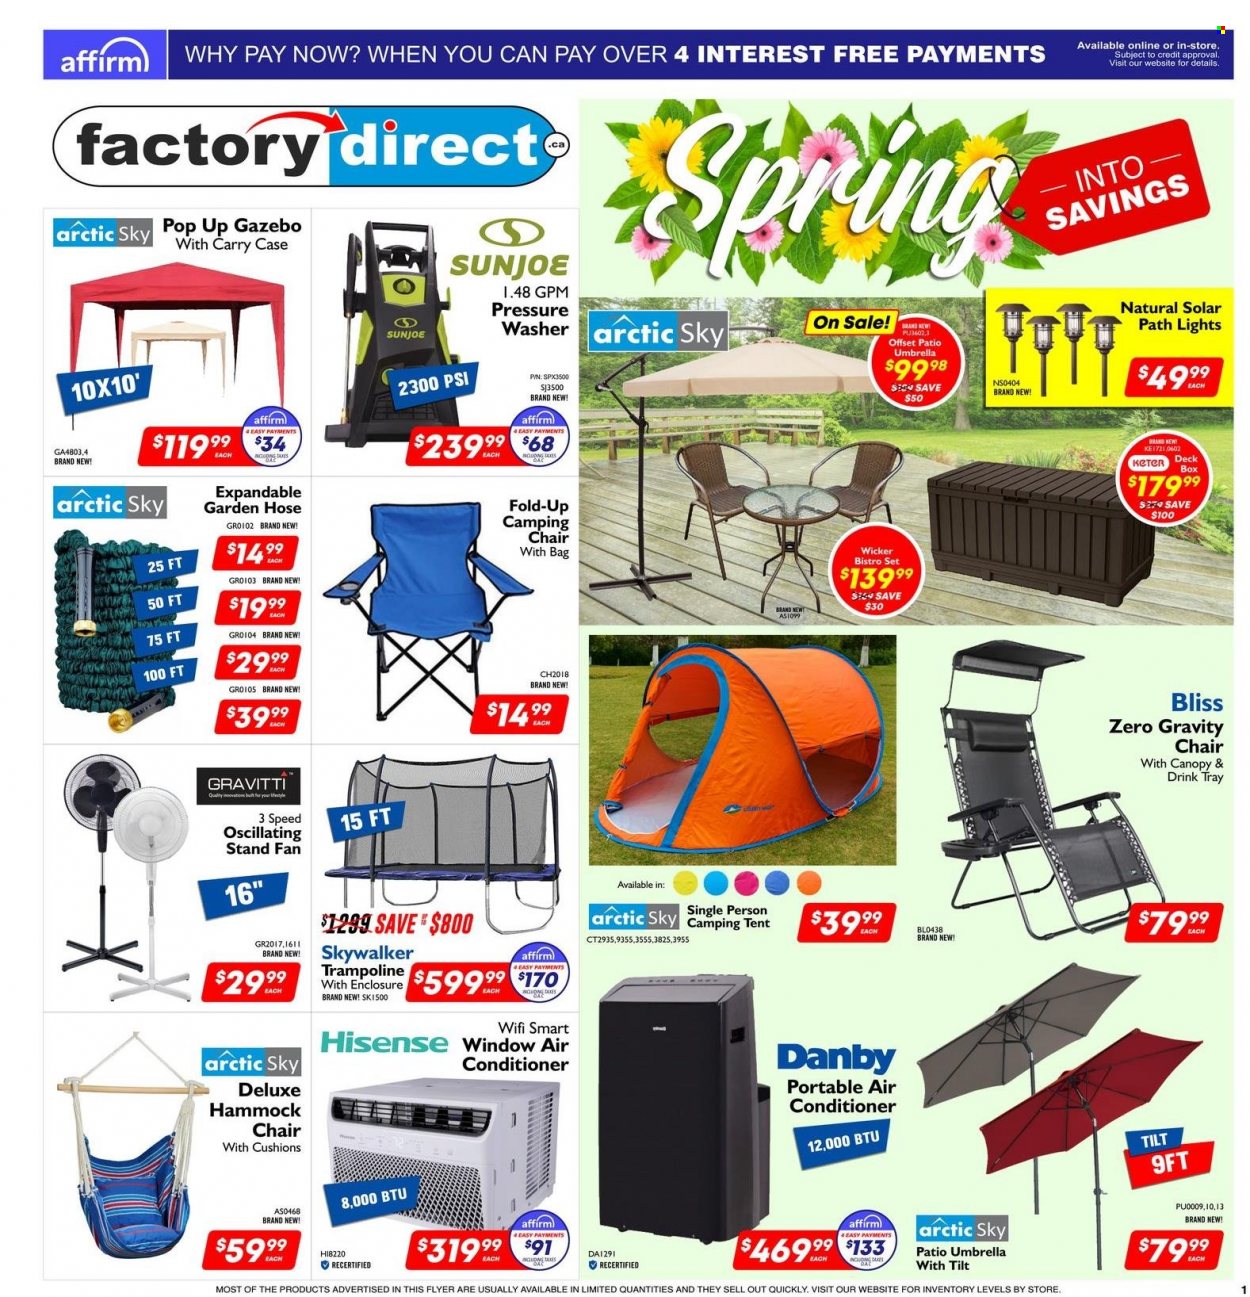 thumbnail - Factory Direct Flyer - March 29, 2023 - April 04, 2023 - Sales products - chair, tray, bag, Hisense, Danby, air conditioner, portable air conditioner, stand fan, pressure washer, garden hose, hammock, tent, camping chair, camping tent. Page 1.